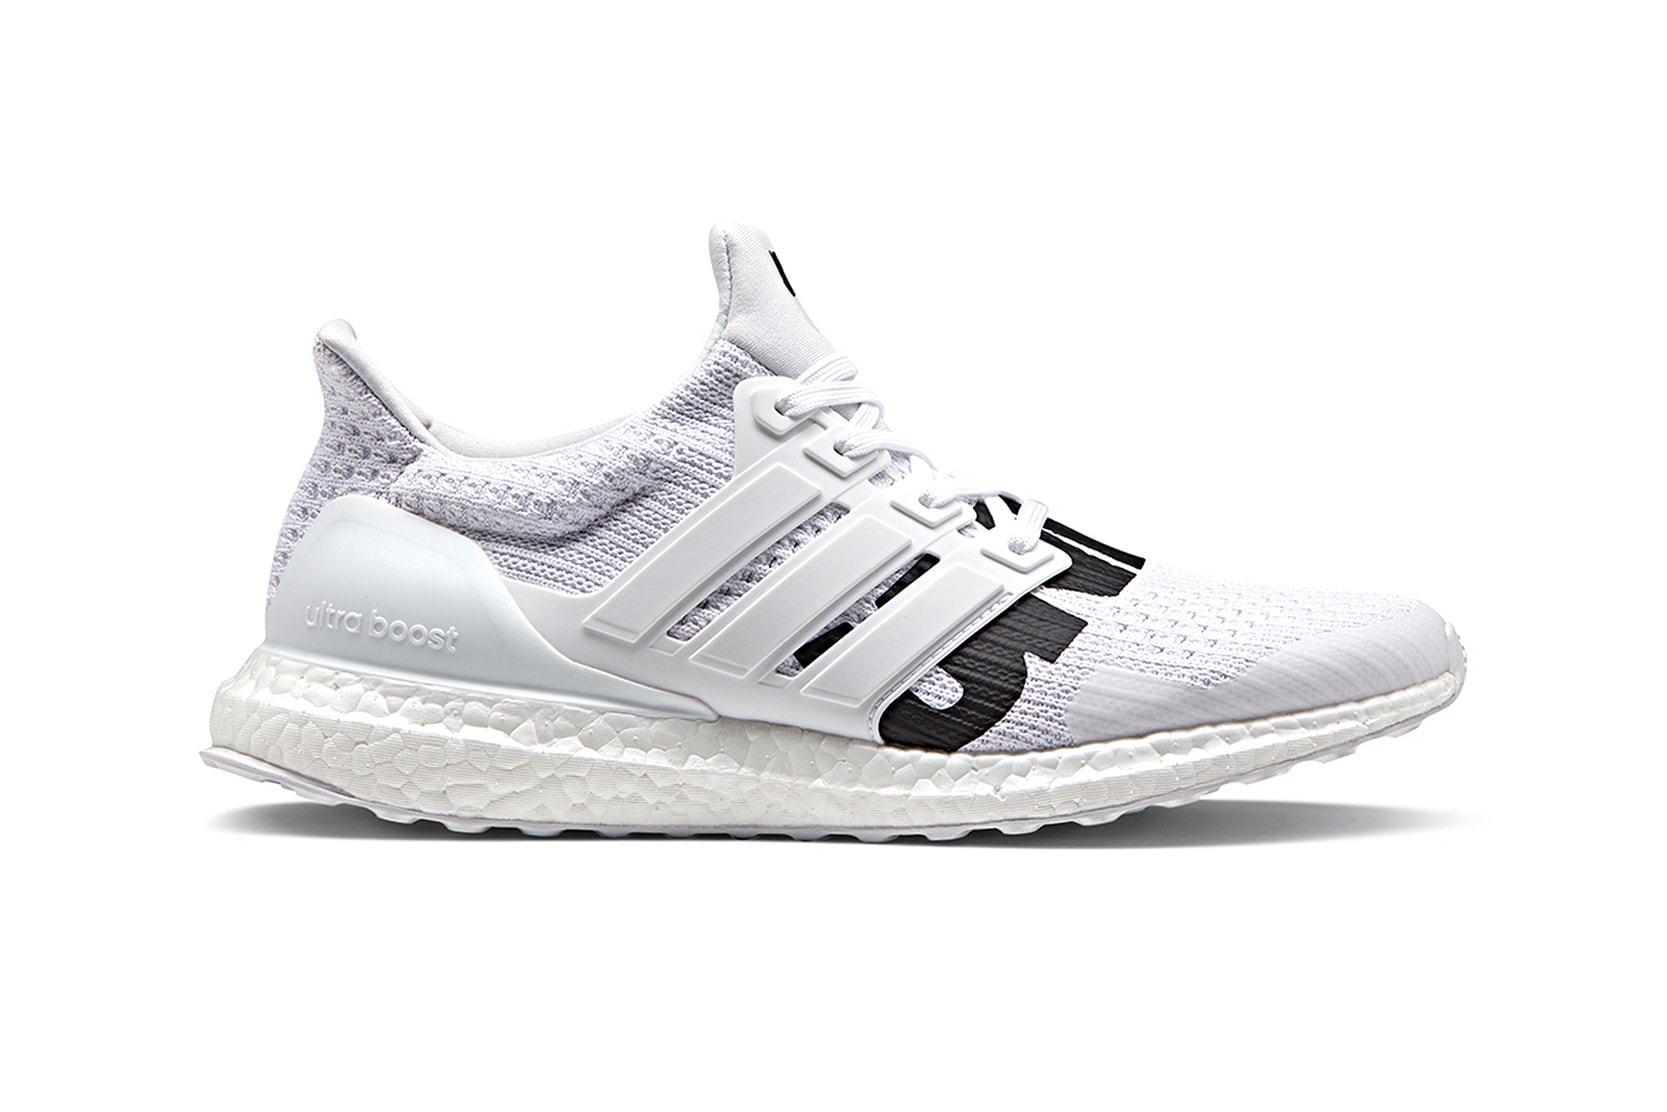 UNDEFEATED adidas Spring/Summer 2018 closer look UltraBOOST adizero adios 3 sneakers footwear trainers release information drop how to buy purchase